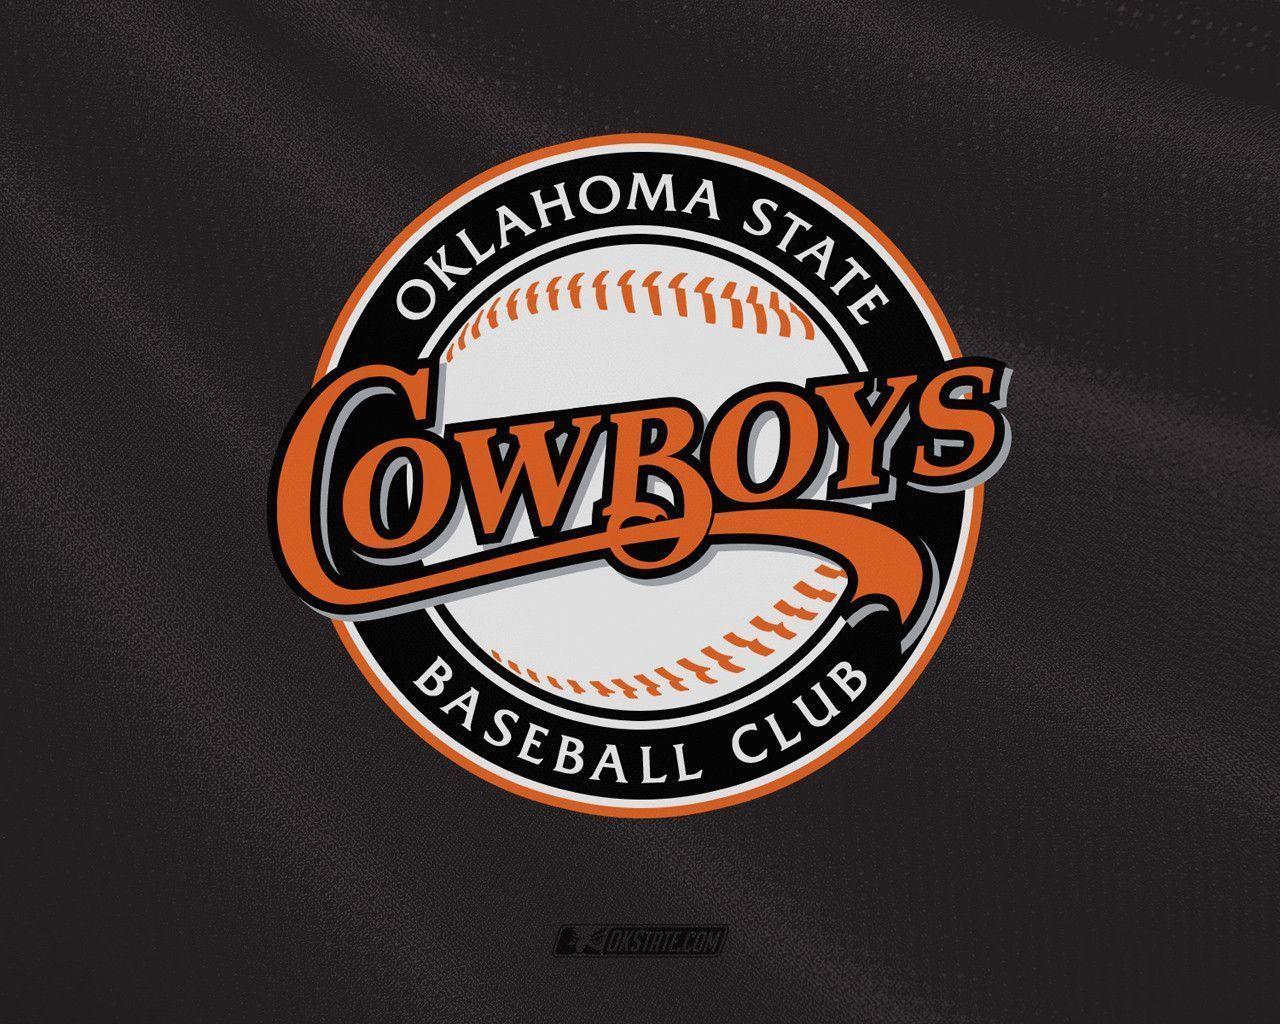 Oklahoma State Official Athletic Site